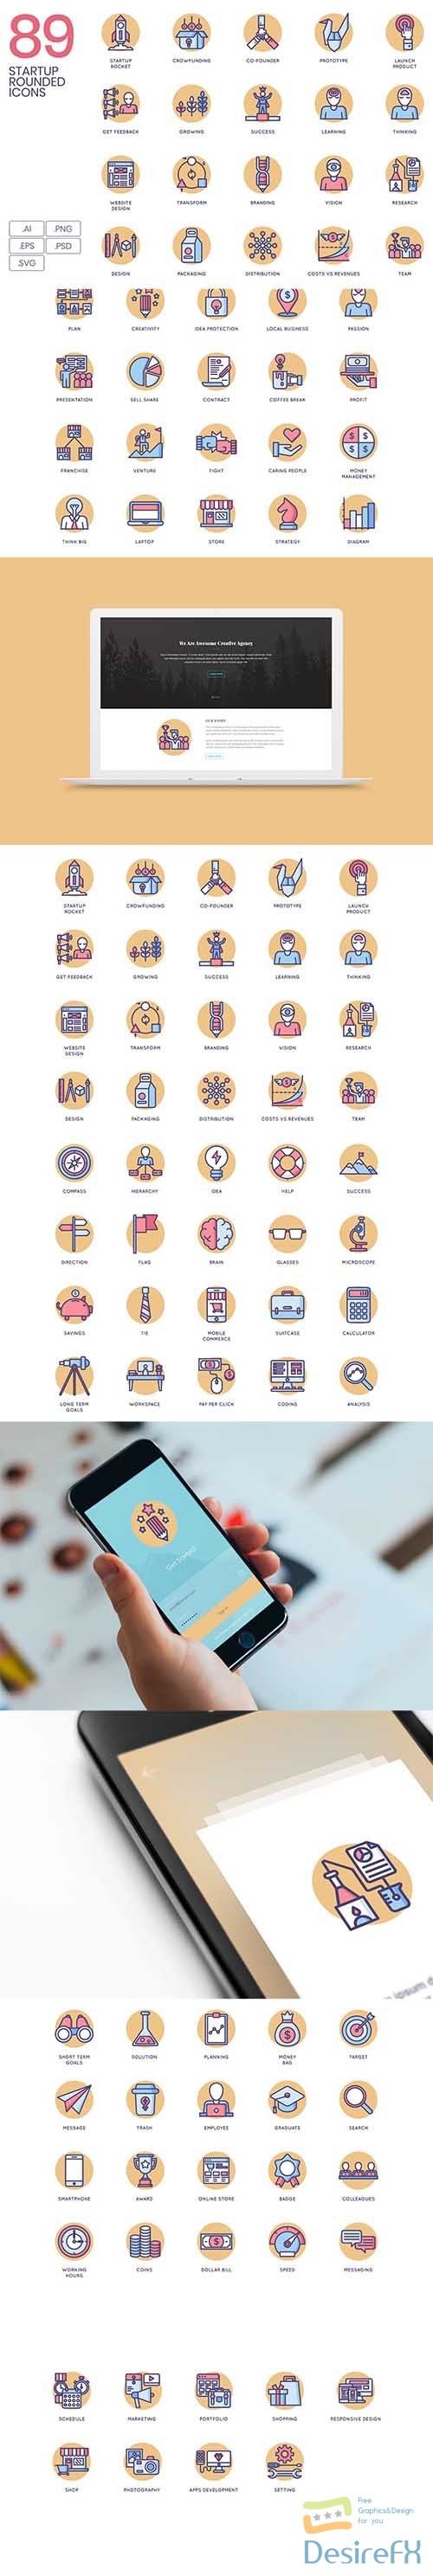 Startup Rounded Flat Icons